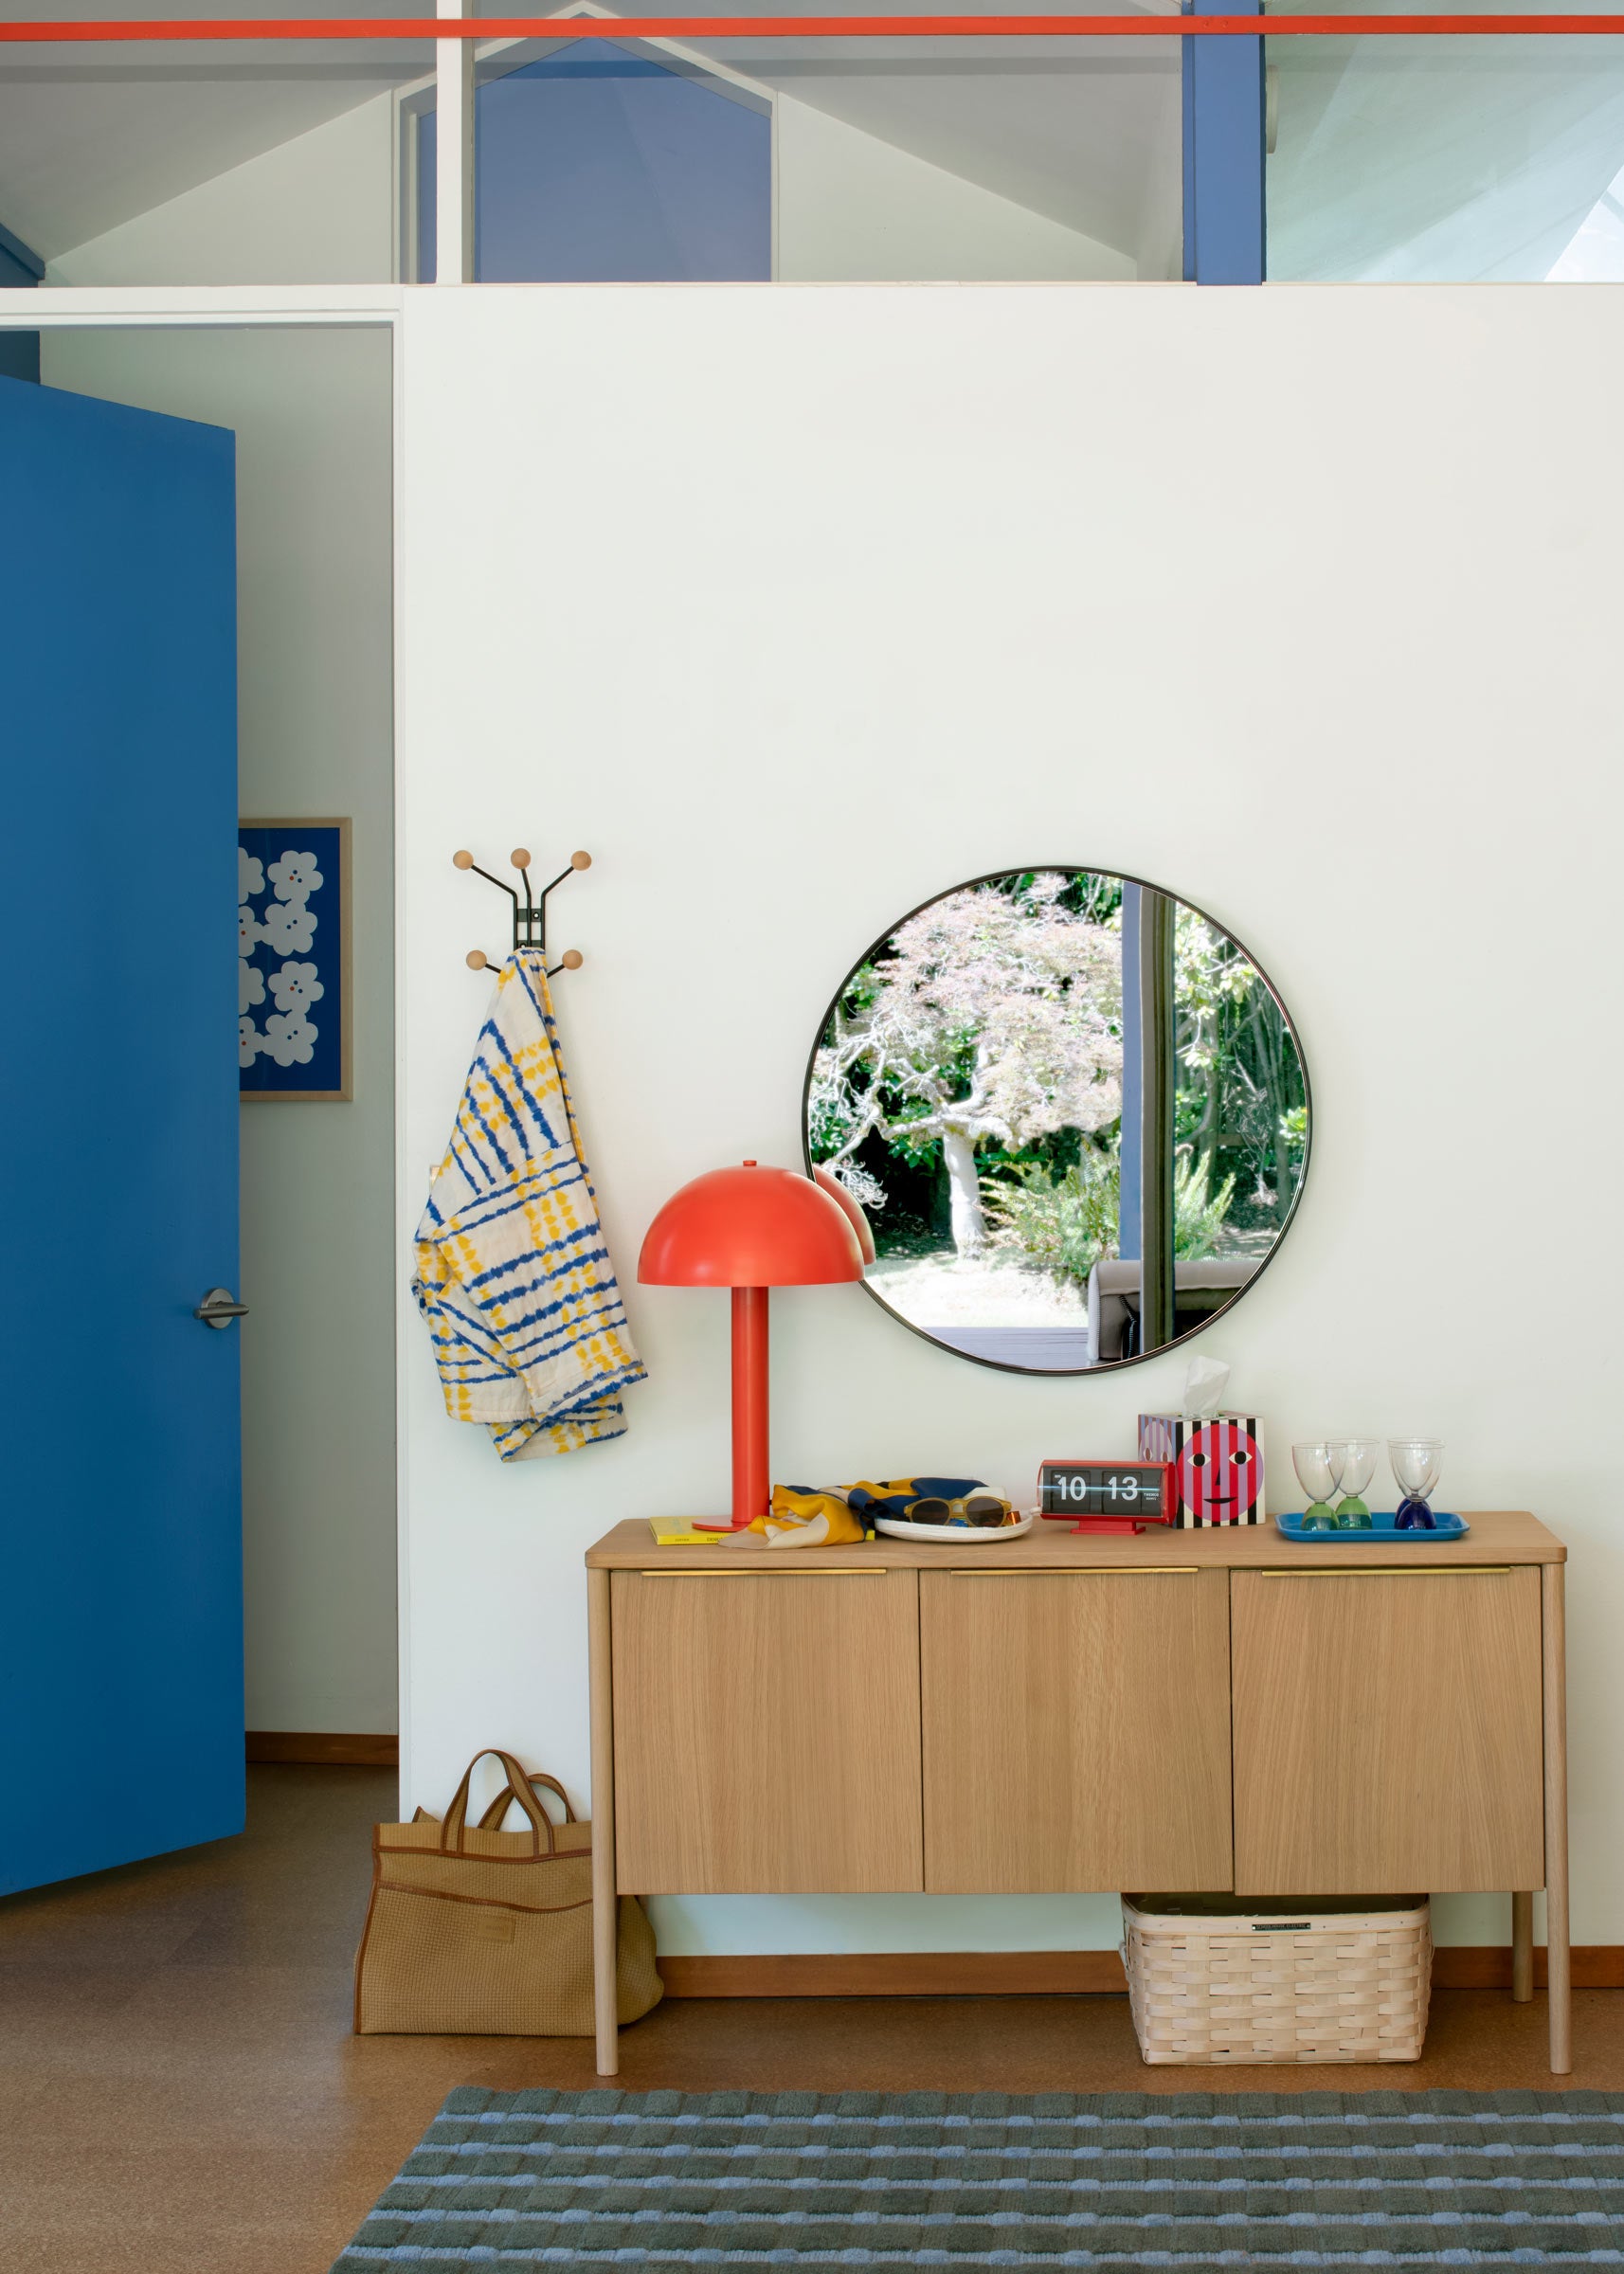 A large round mirror over a sideboard.